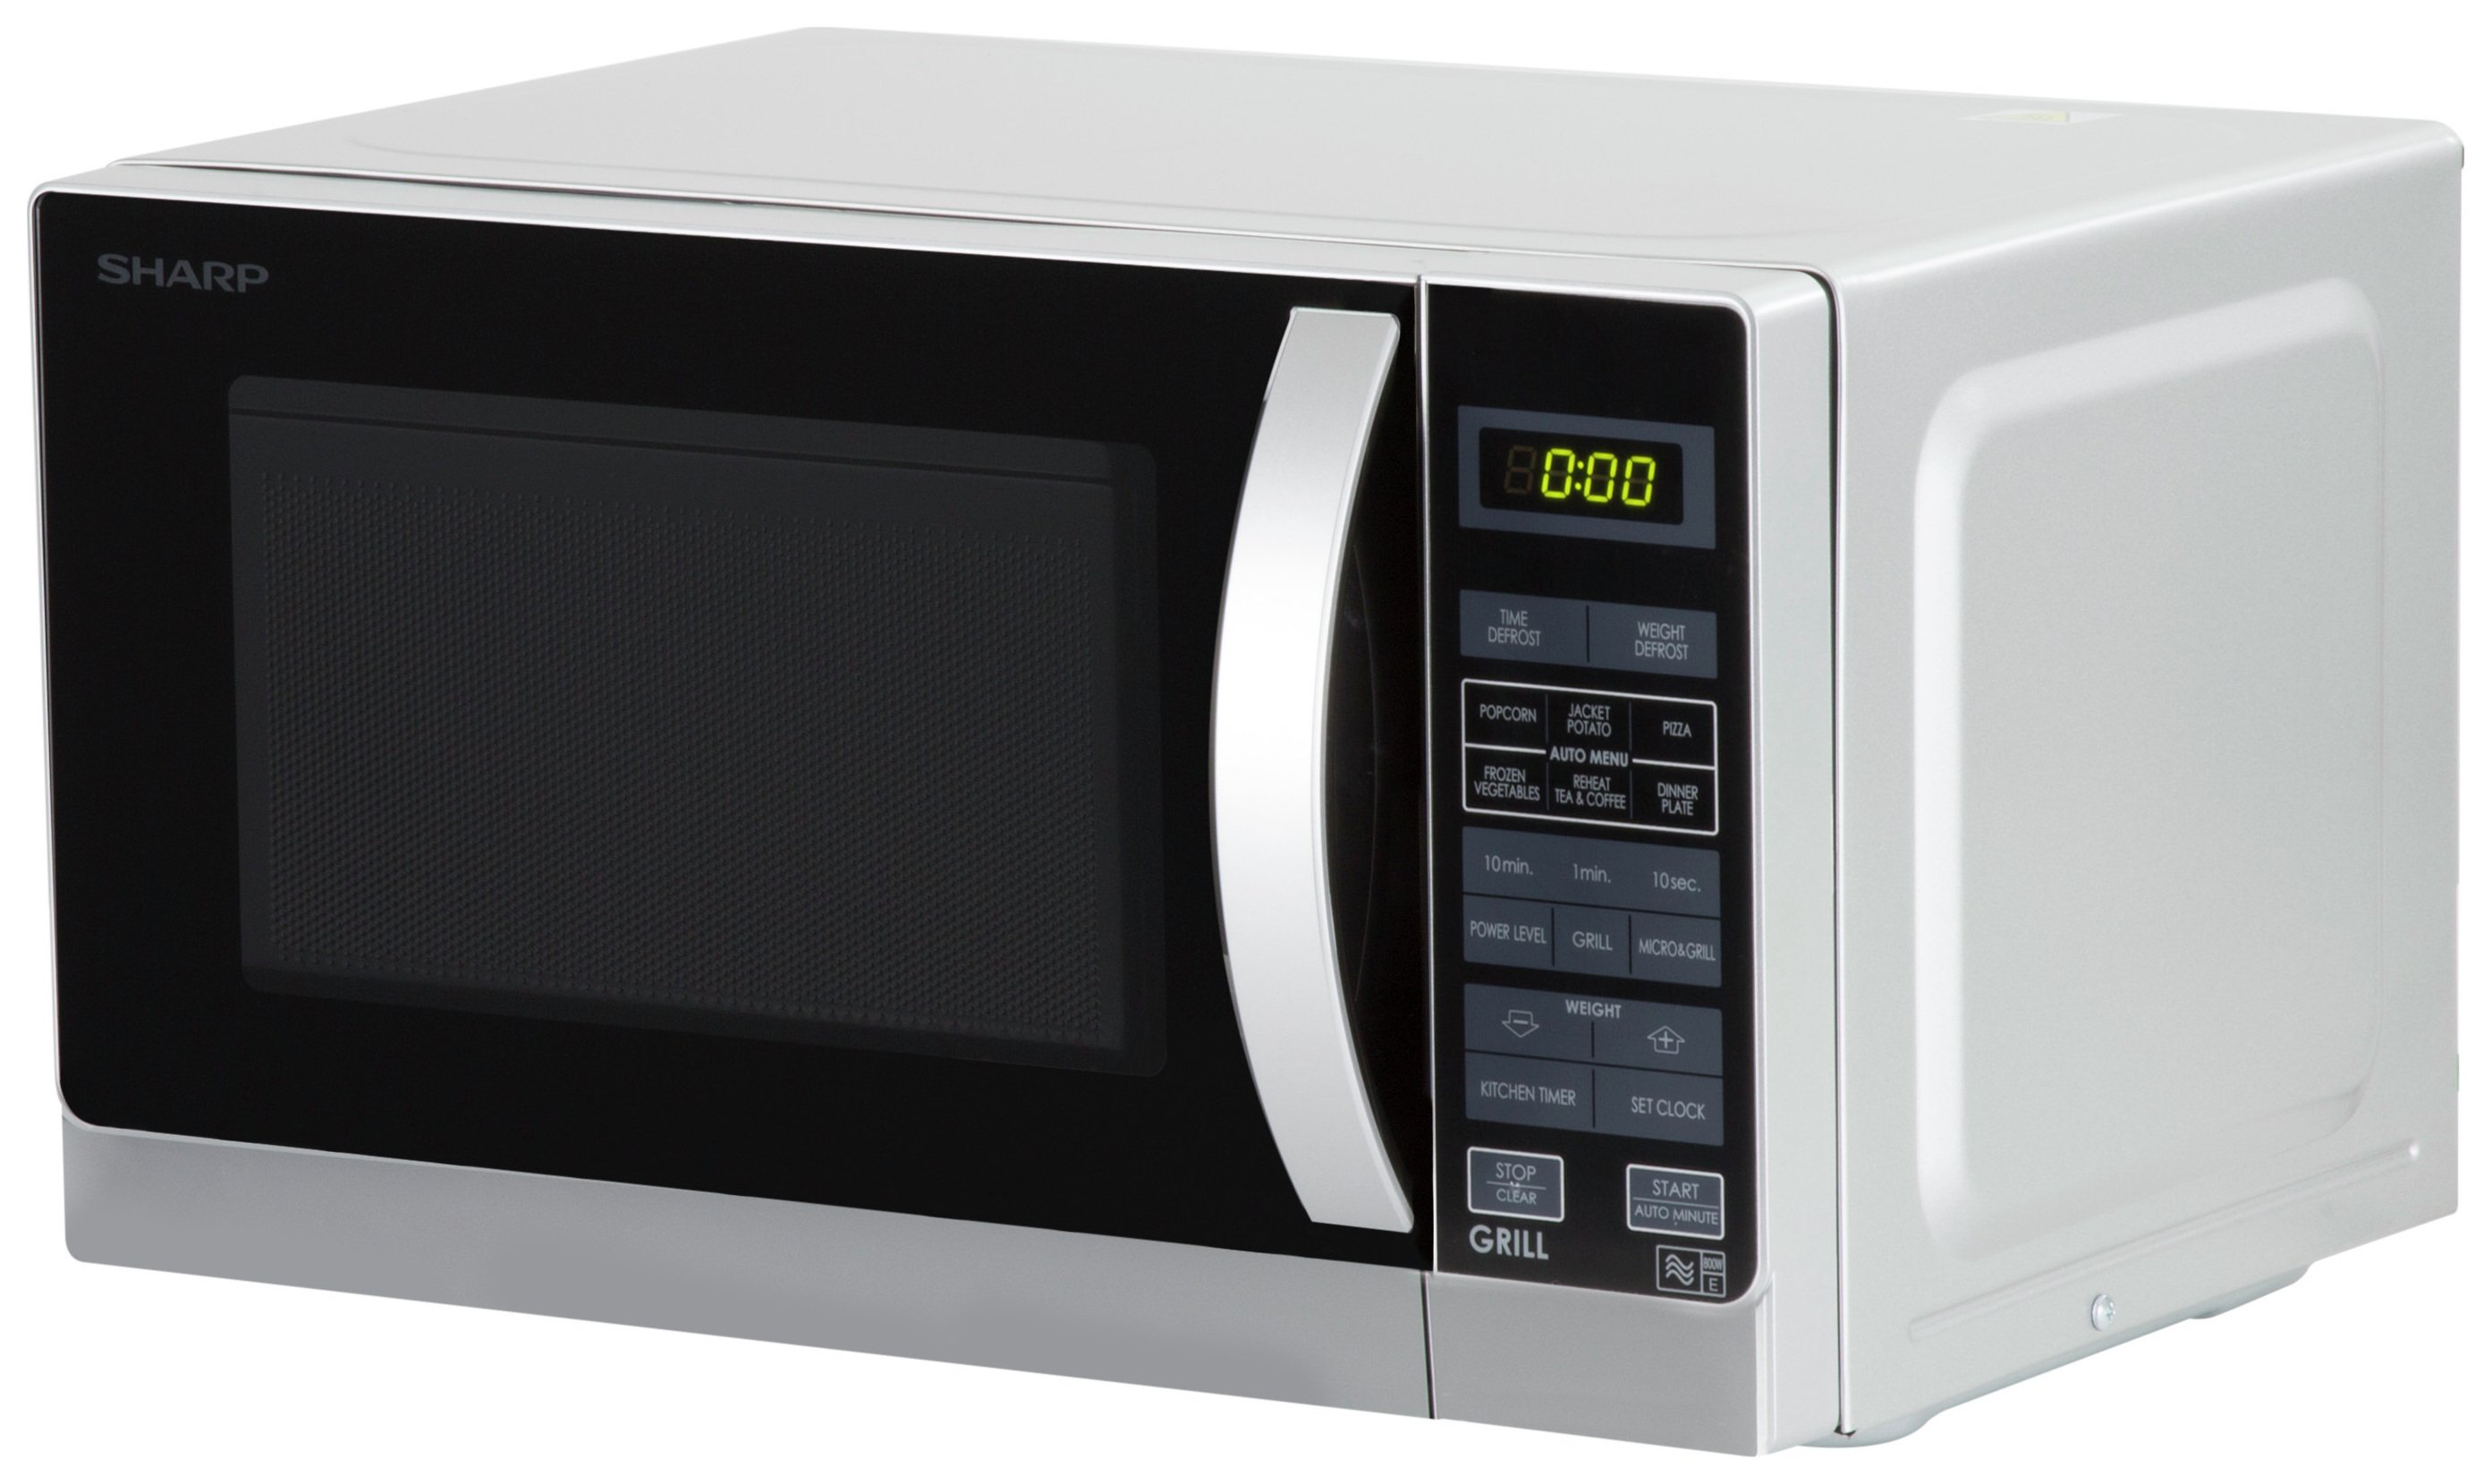 sharp-800w-microwave-with-grill-r662slm-reviews